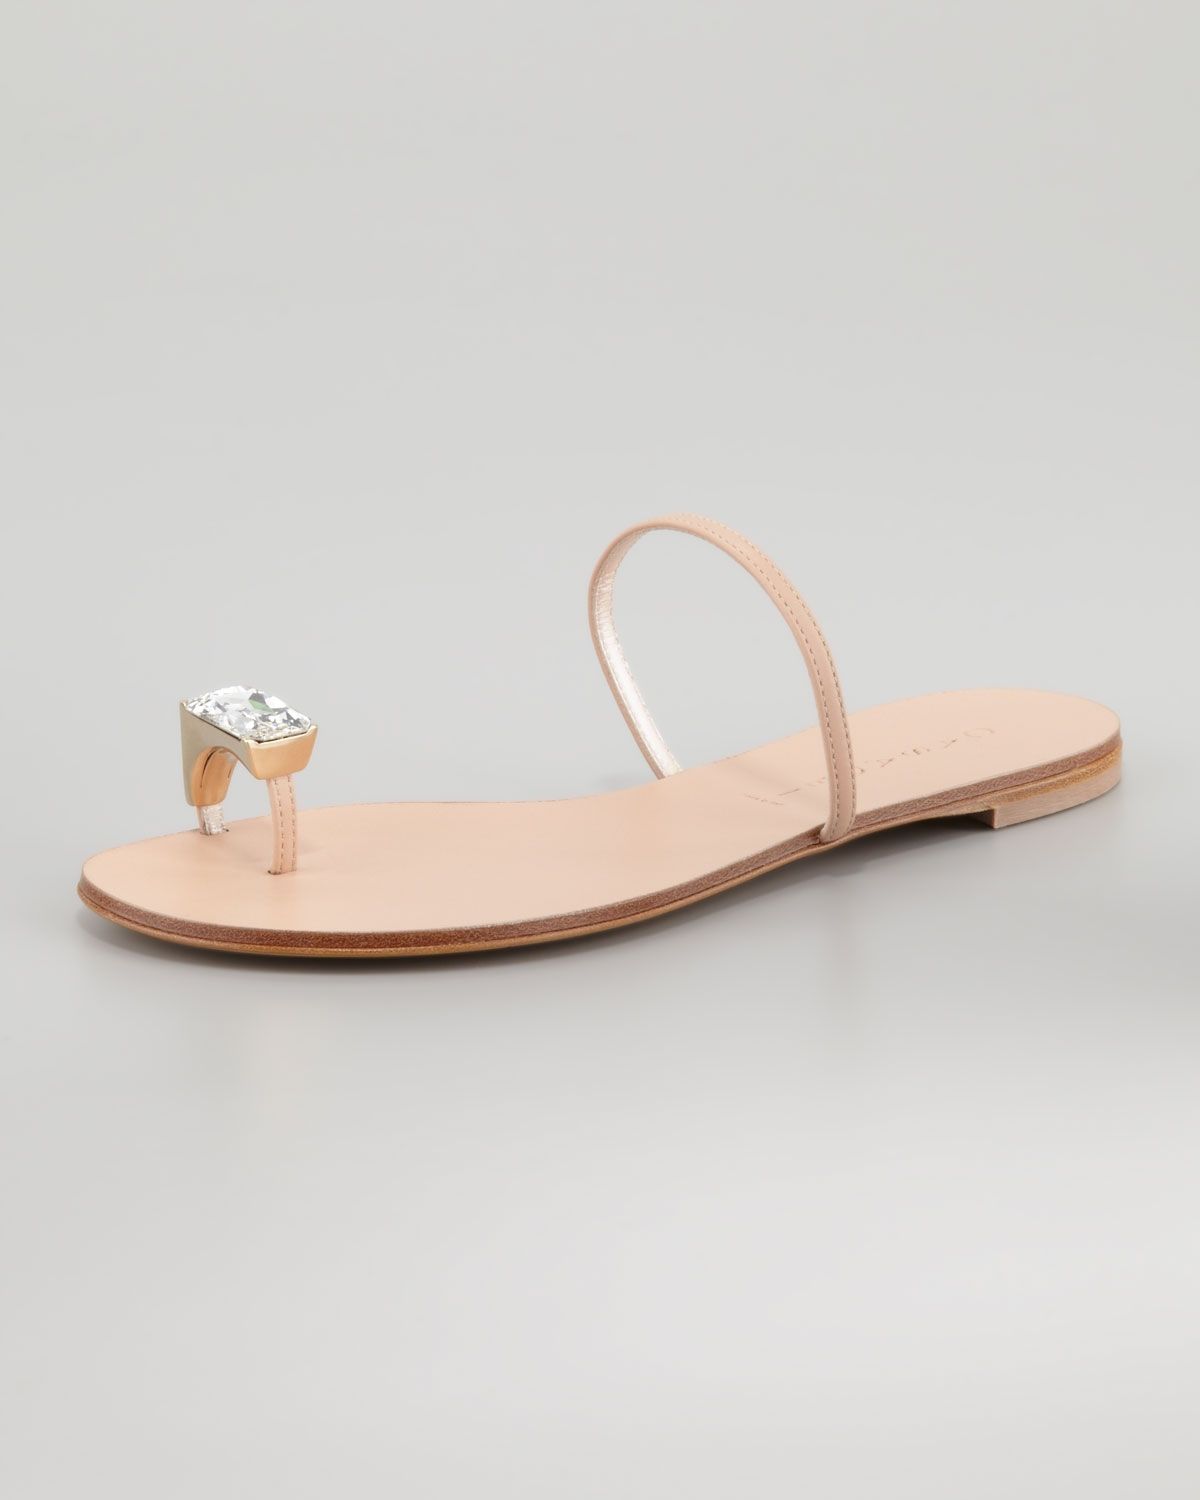 Lyst – Casadei Flat Crystal Toering Sandal In Natural Throughout Recent Crystal Toe Rings (View 3 of 15)